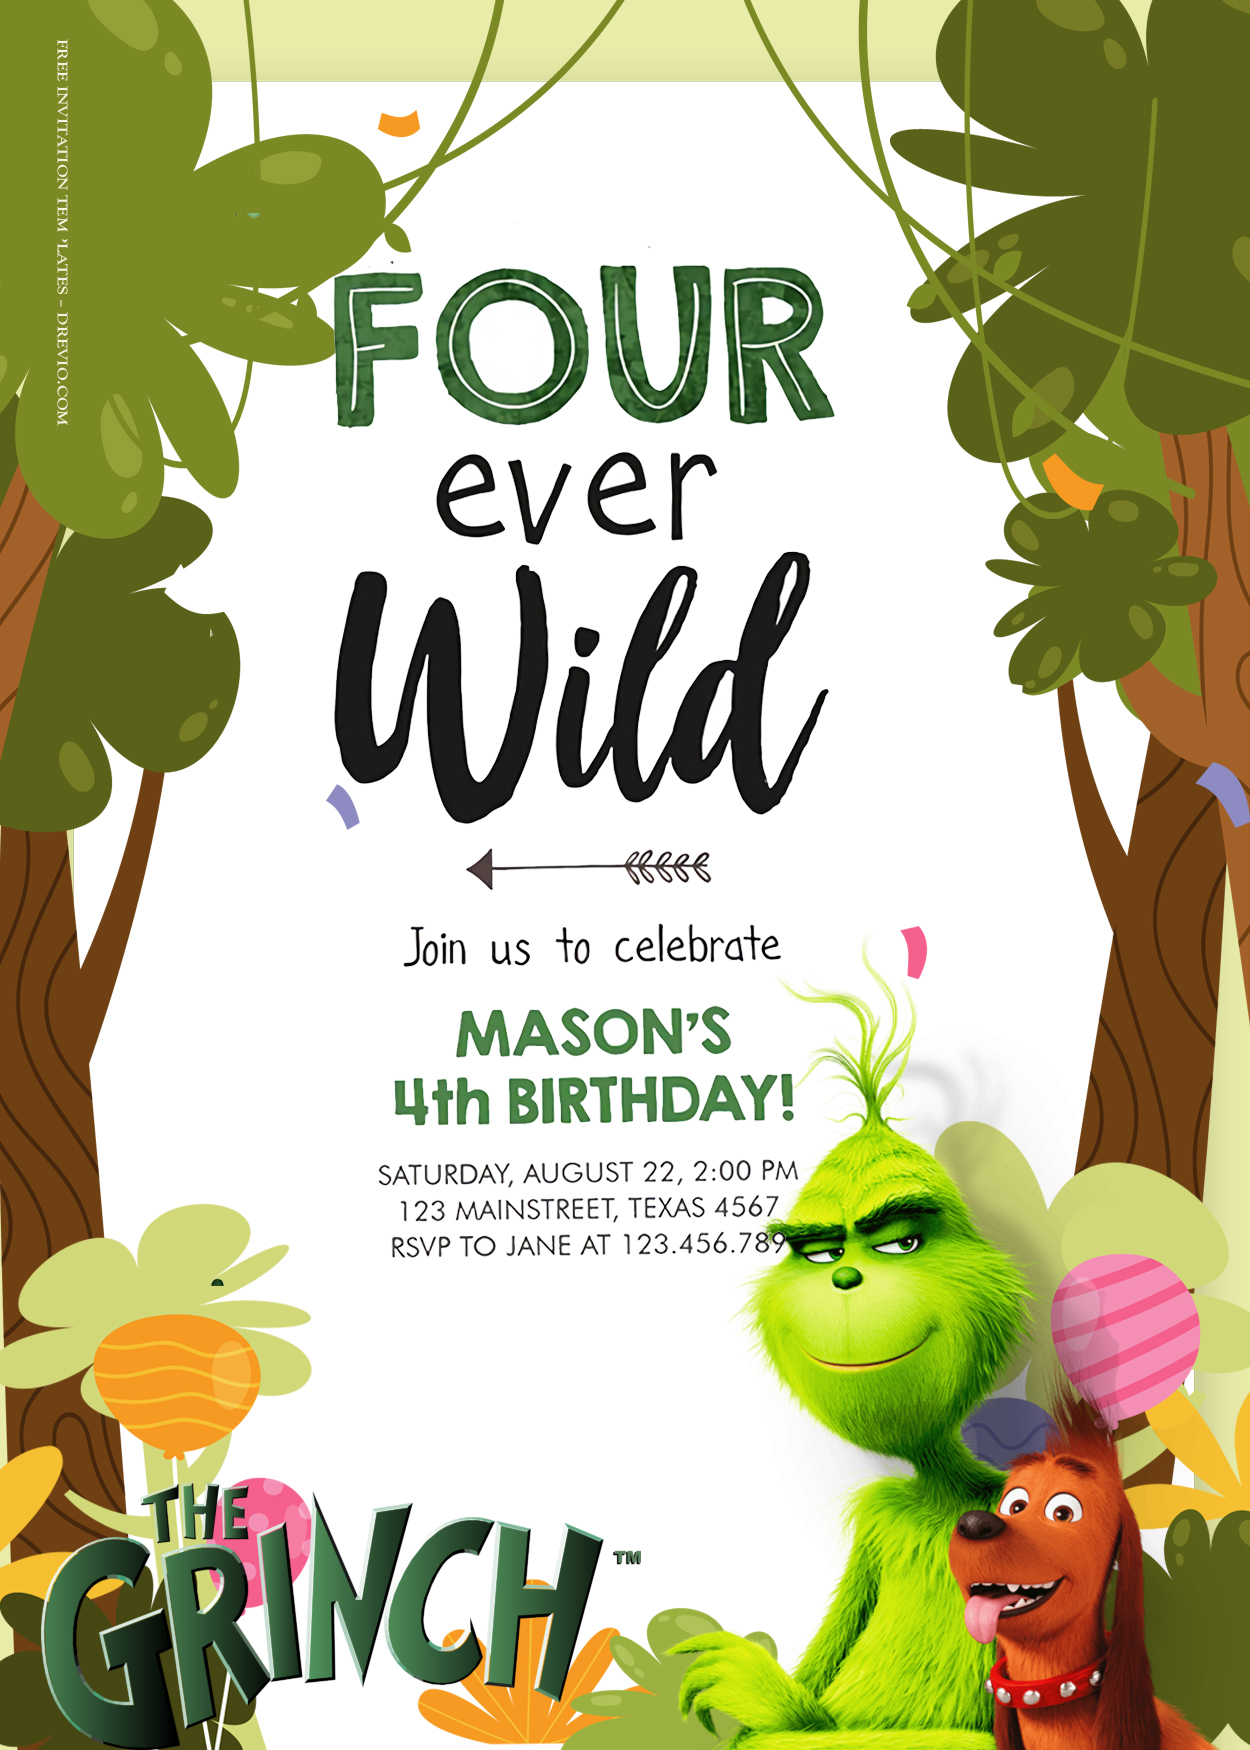 7+ The Grinch Spring Party Birthday Invitation Templates Title